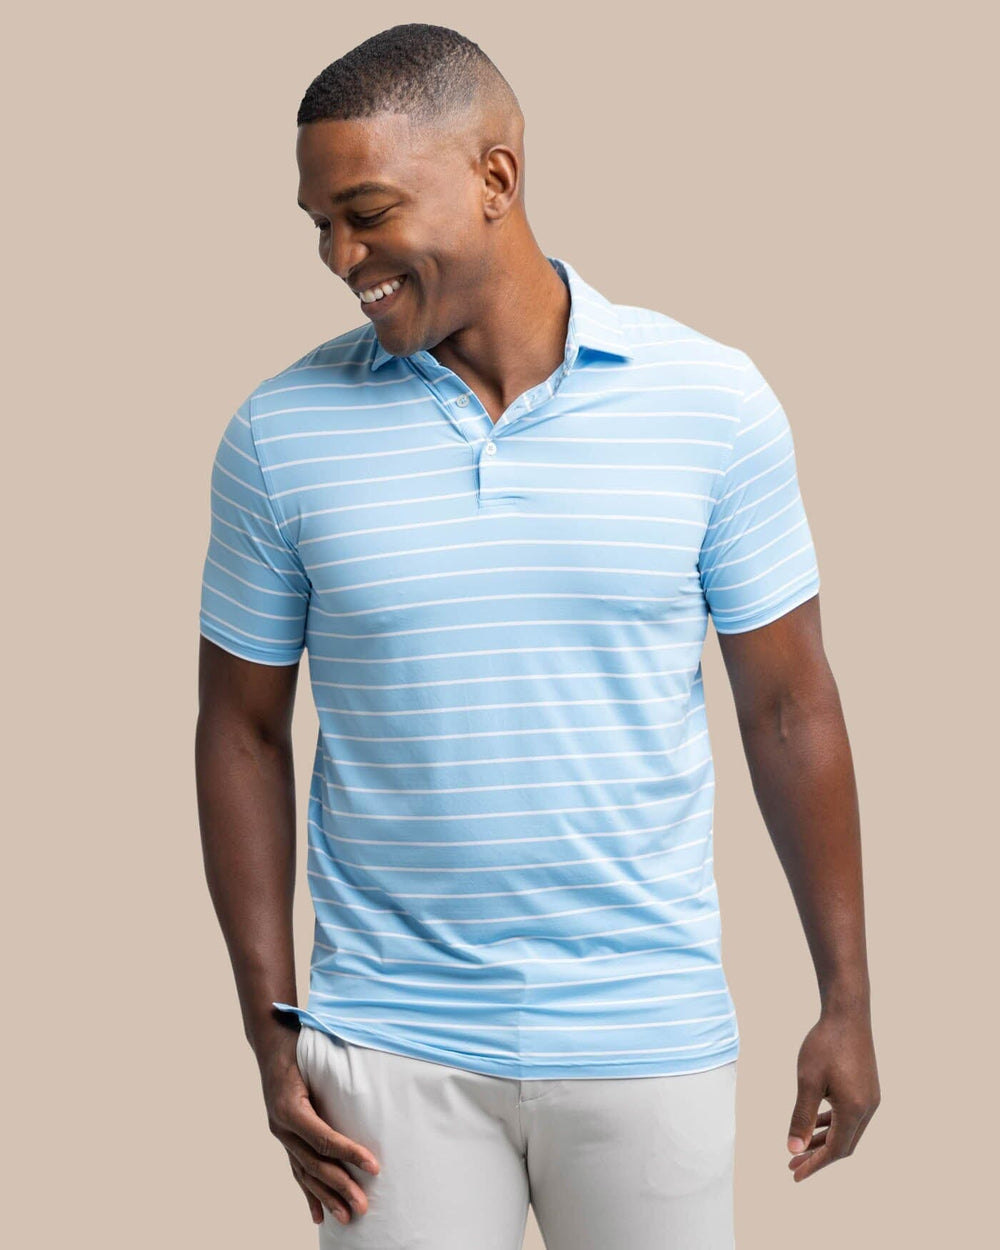 The front view of the Southern Tide brrr-eeze Desmond Stripe Performance Polo by Southern Tide - Rush Blue